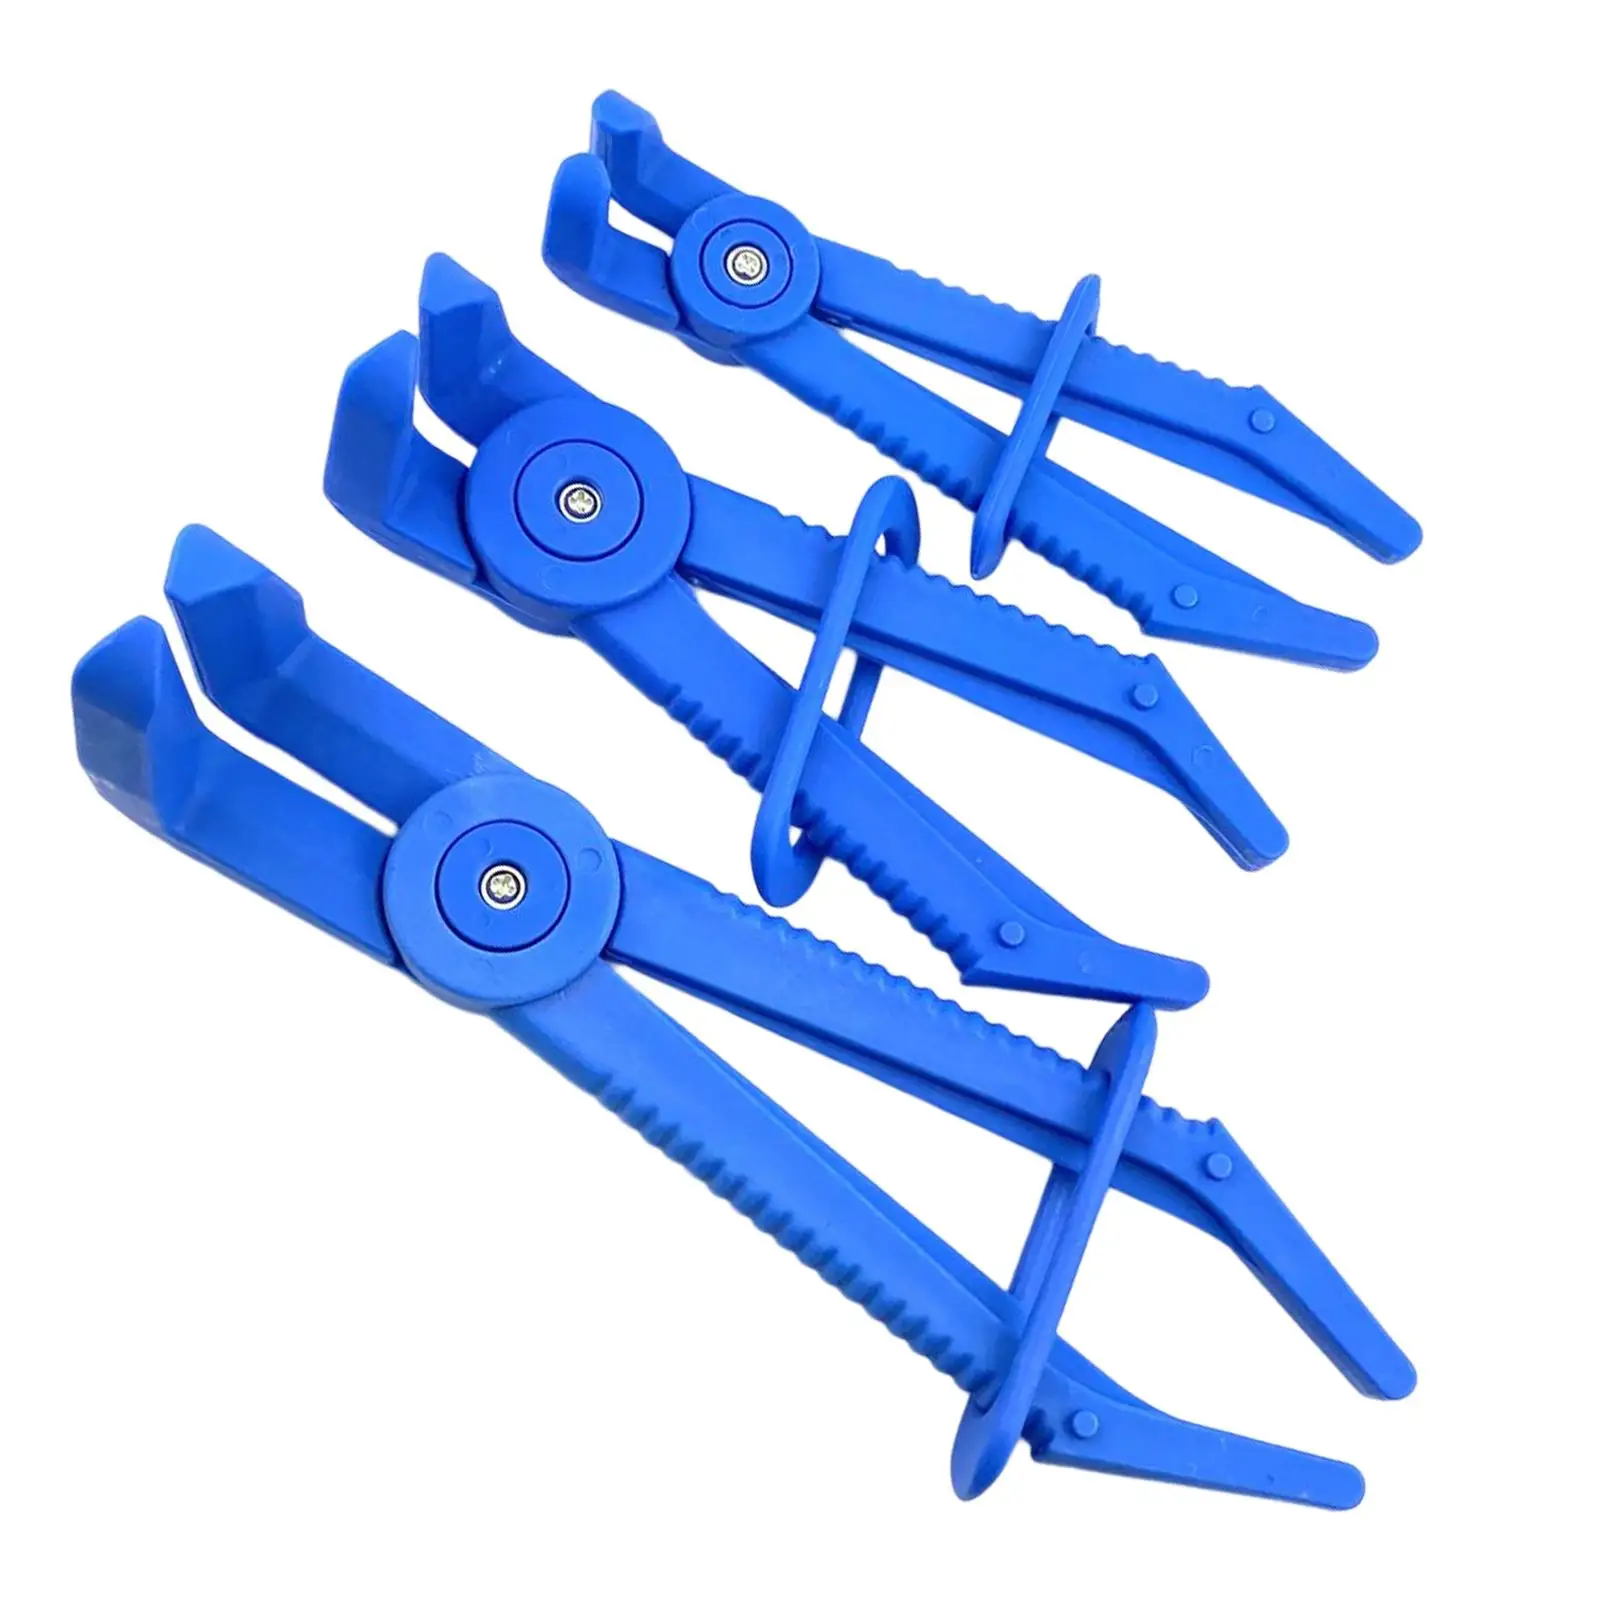 3x Curve Fuel Water Line Hose Pliers Clamp Fuel Lines Sealing Clamps Kit Fit for Auto Pipe Repair Radiator Brake Pipe Fuel Pipe